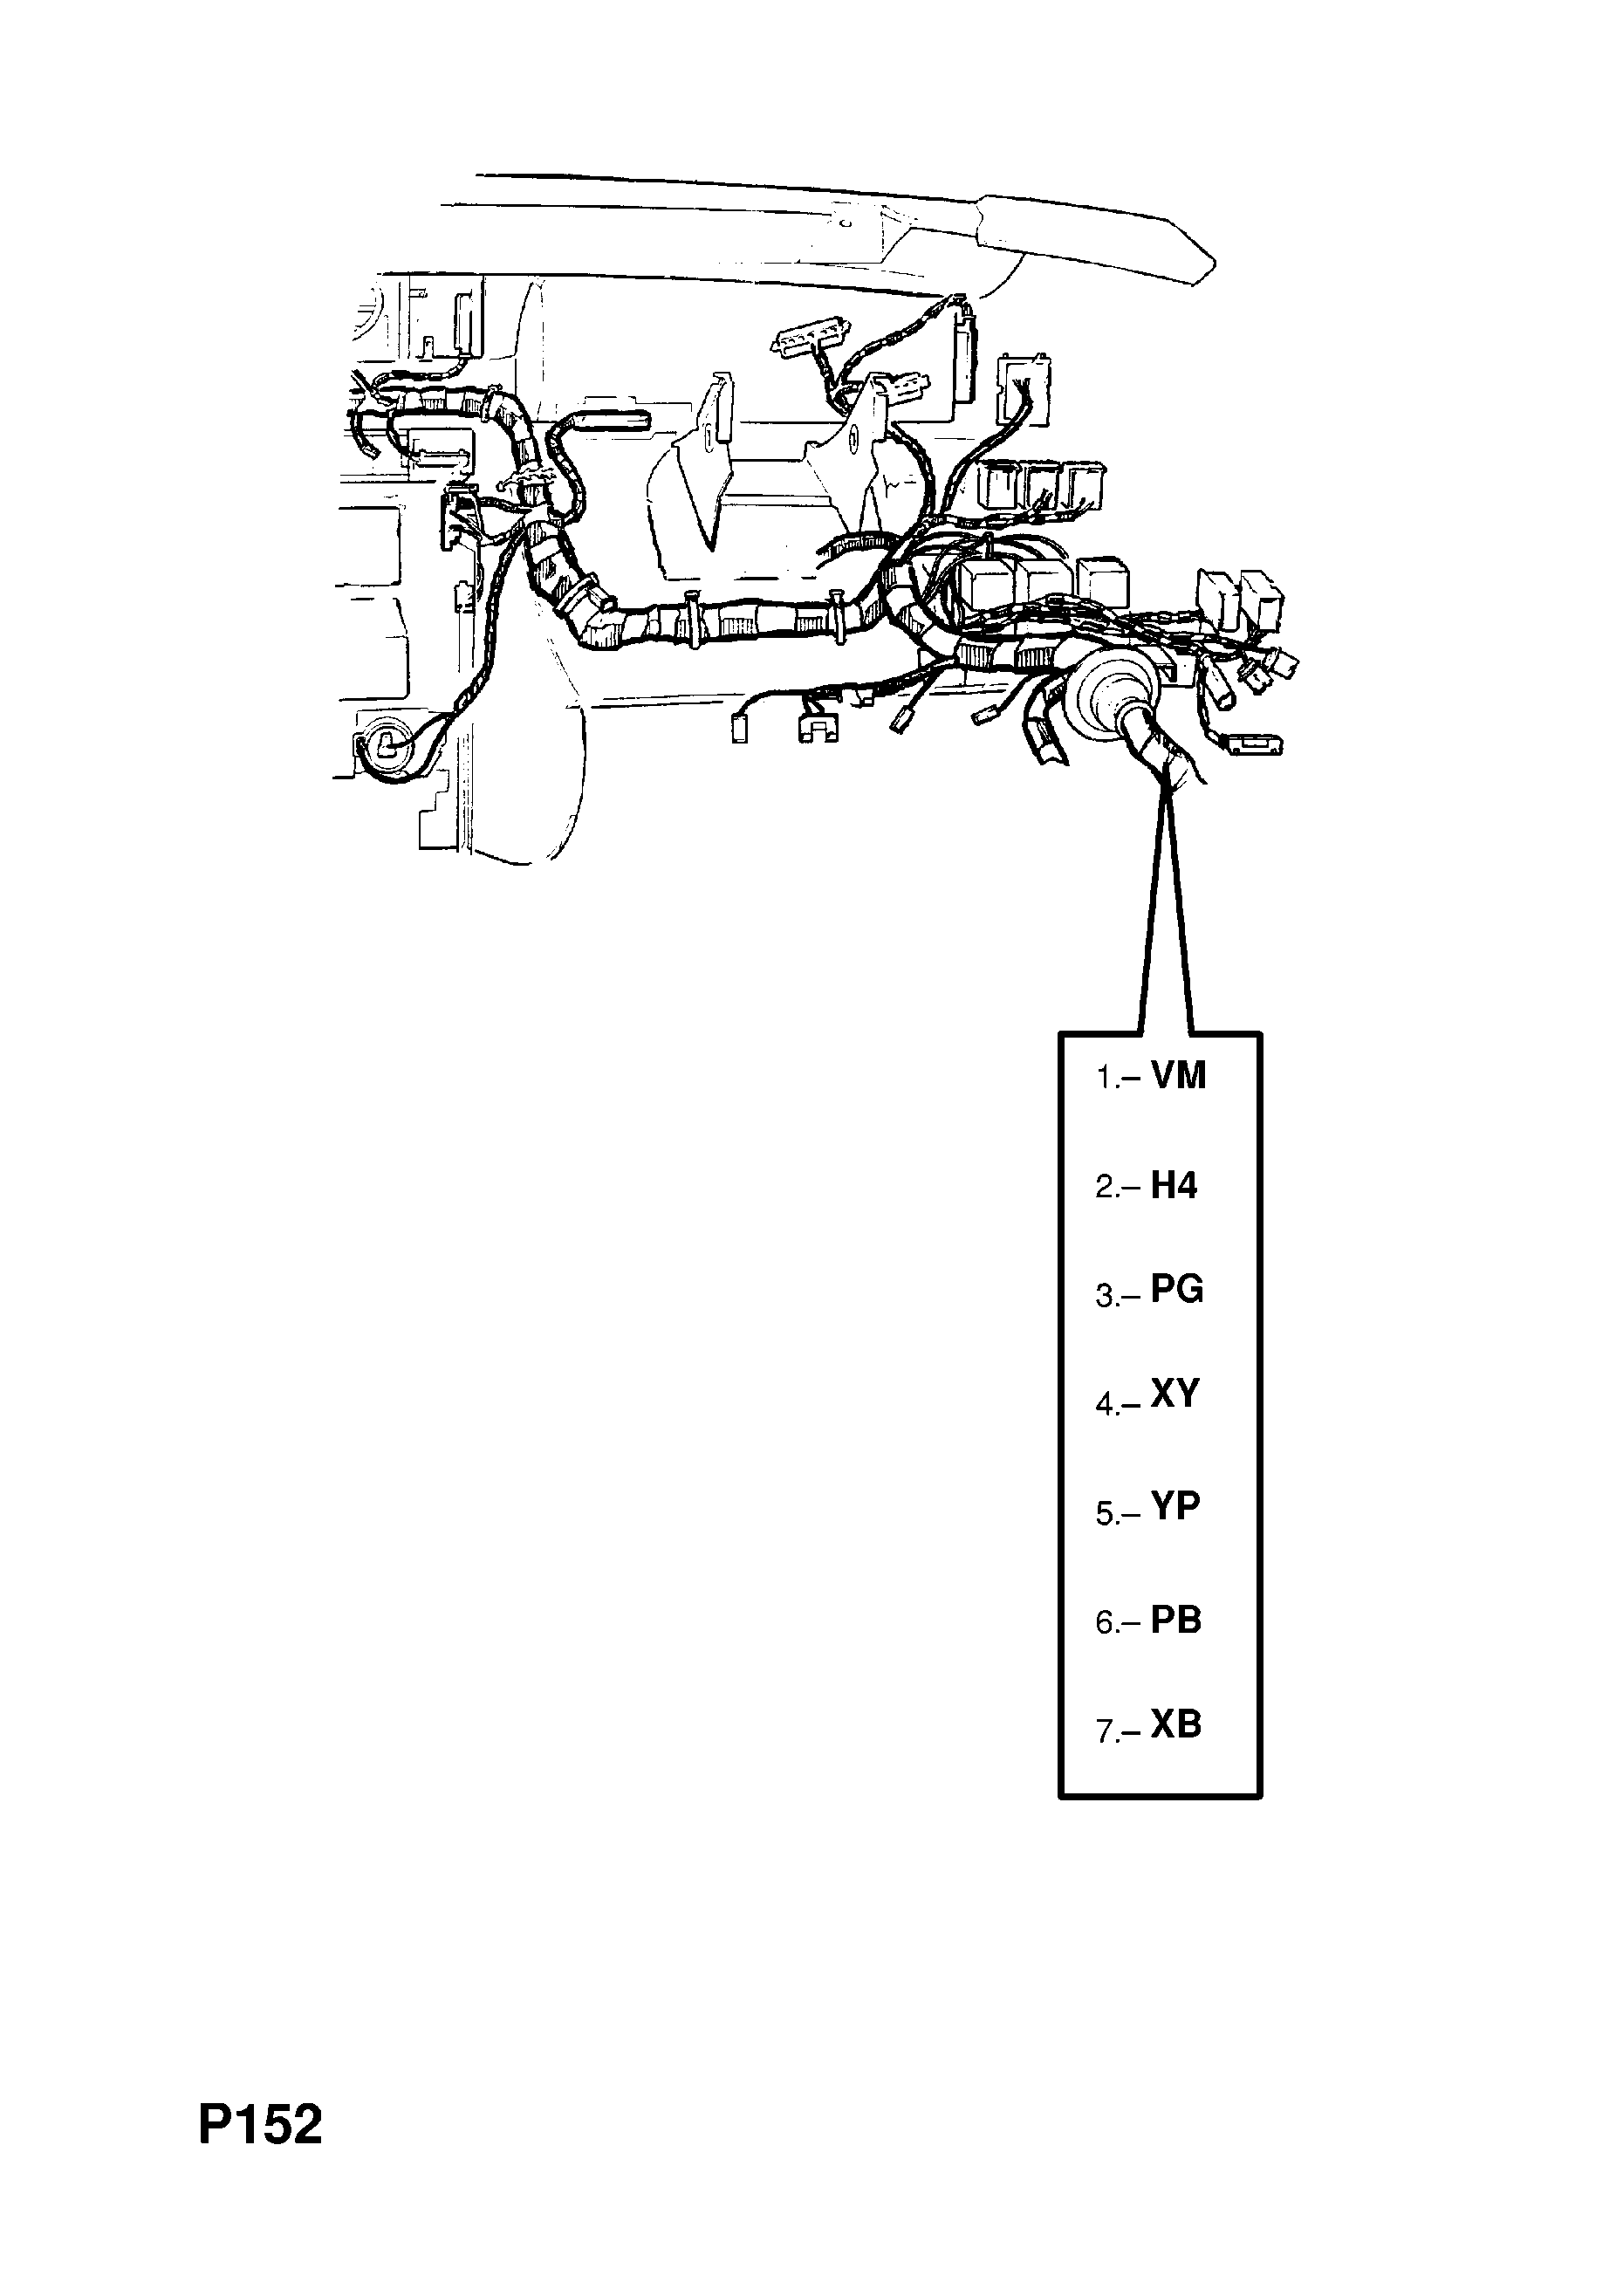 INSTRUMENT PANEL WIRING HARNESS (CONTD.) <small><i>[M1000001- FOR AIR CONDITIONING, MANUAL TRANSMISSION AND LCD INSTRUMENTS]</i></small>